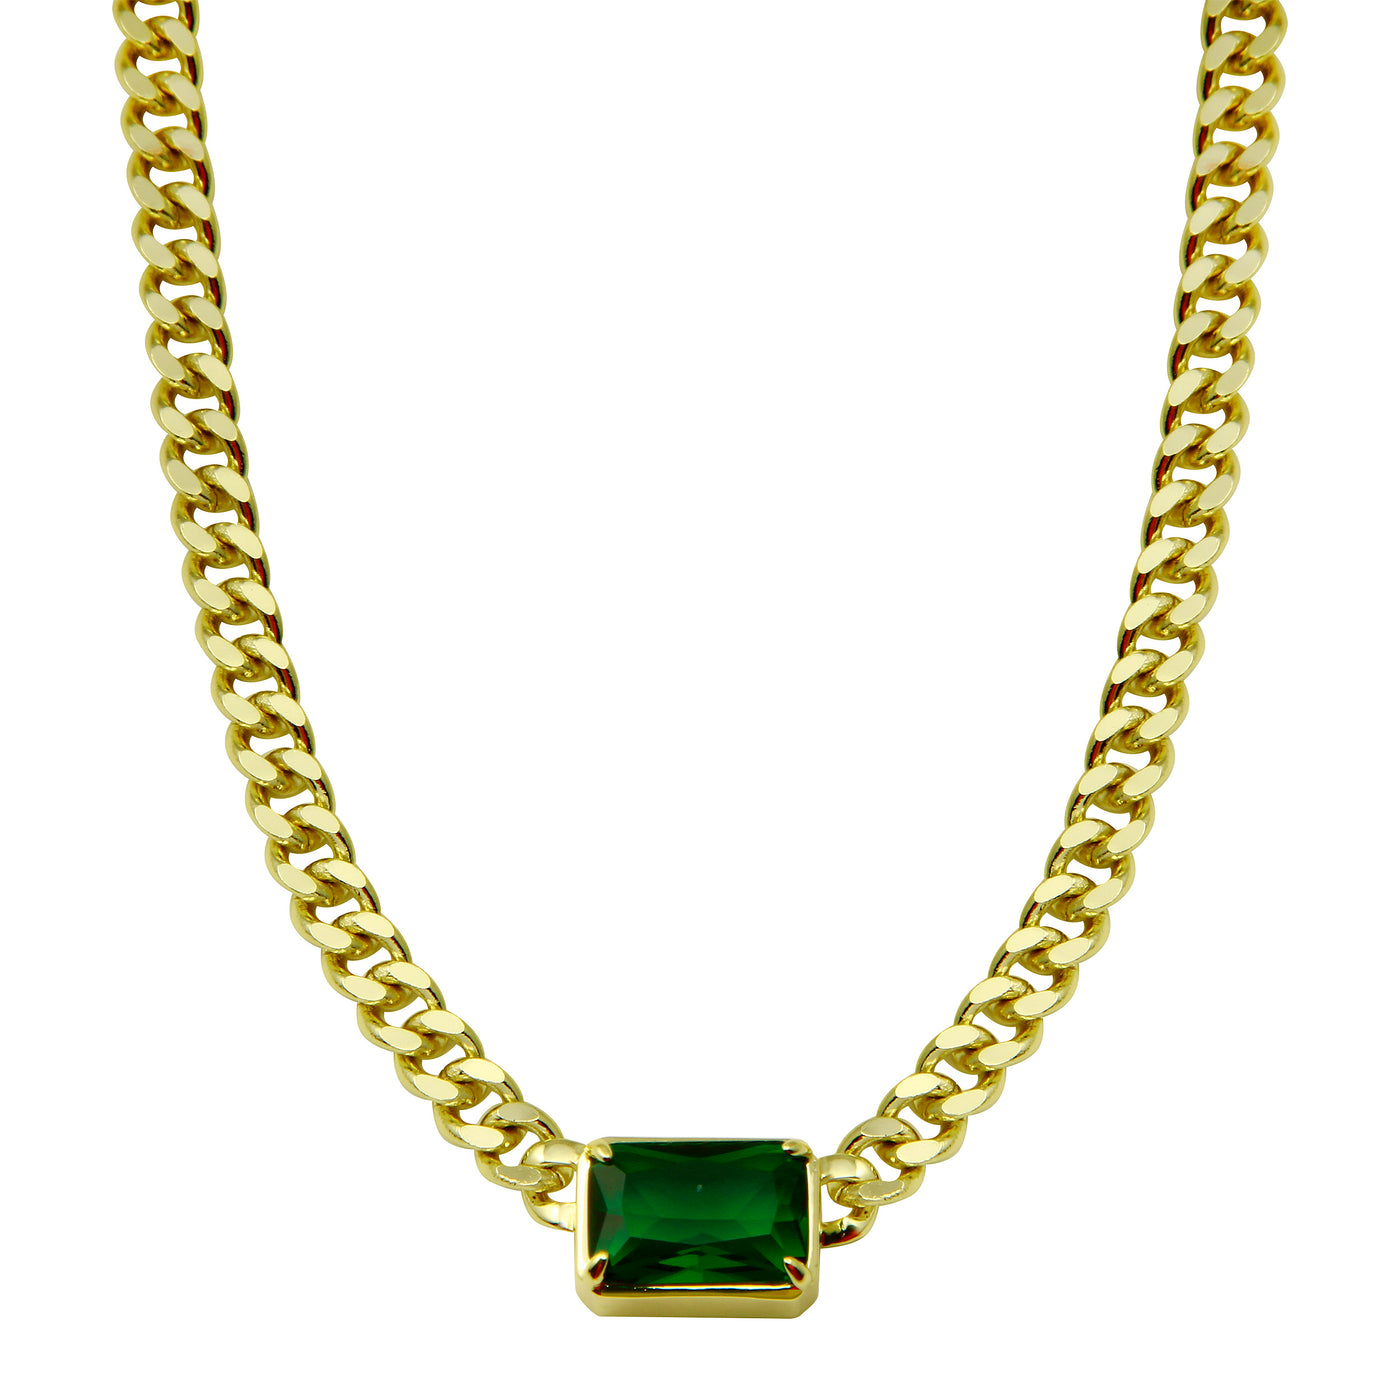 The Green Emerald Cuban Necklace